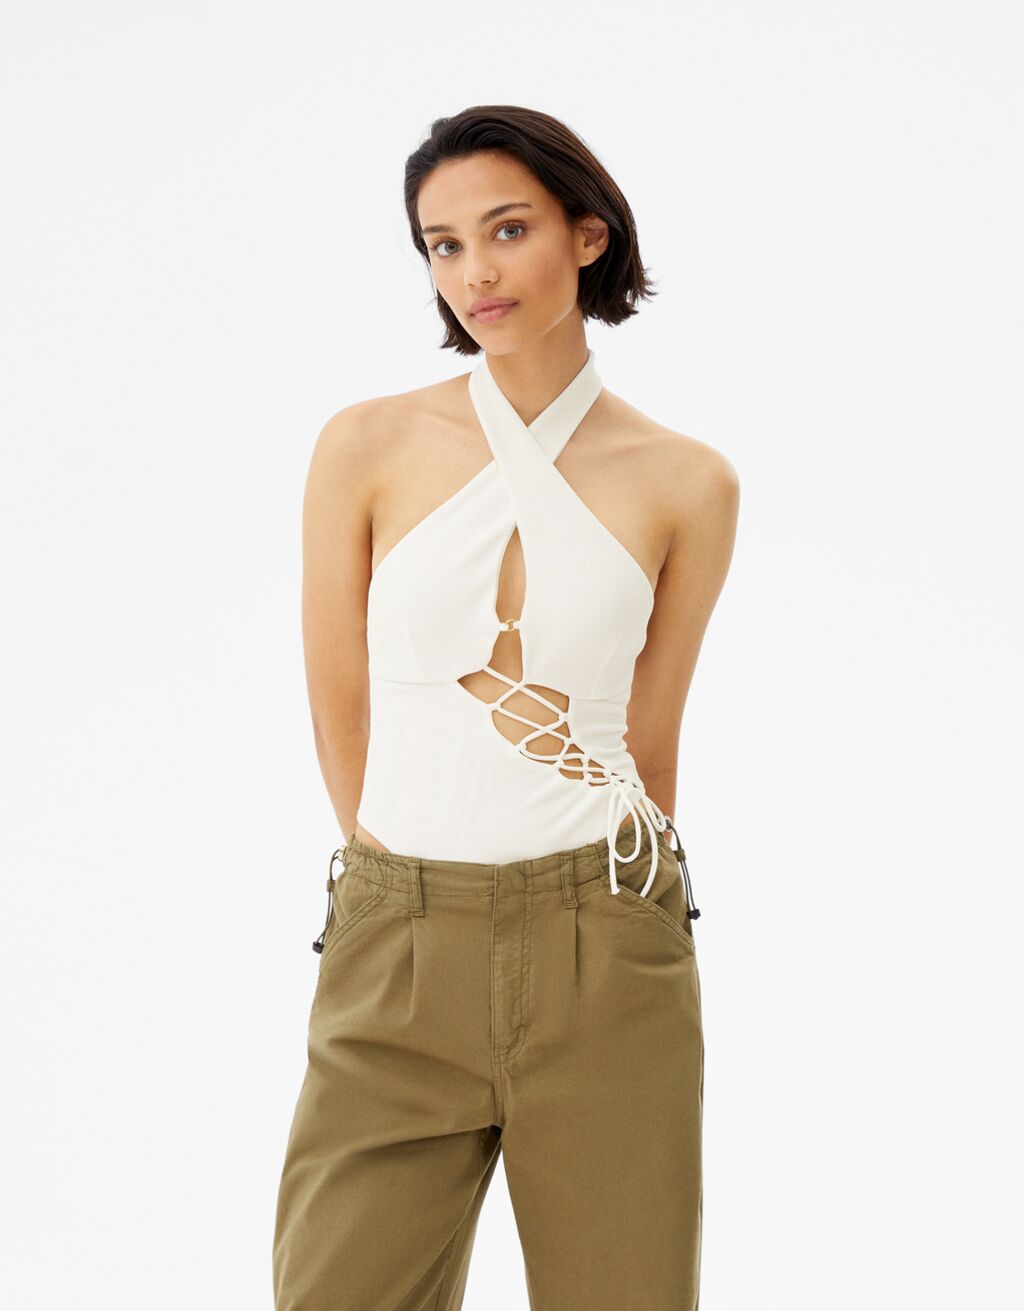 Lace-up ottoman bodysuit with crossover neckline